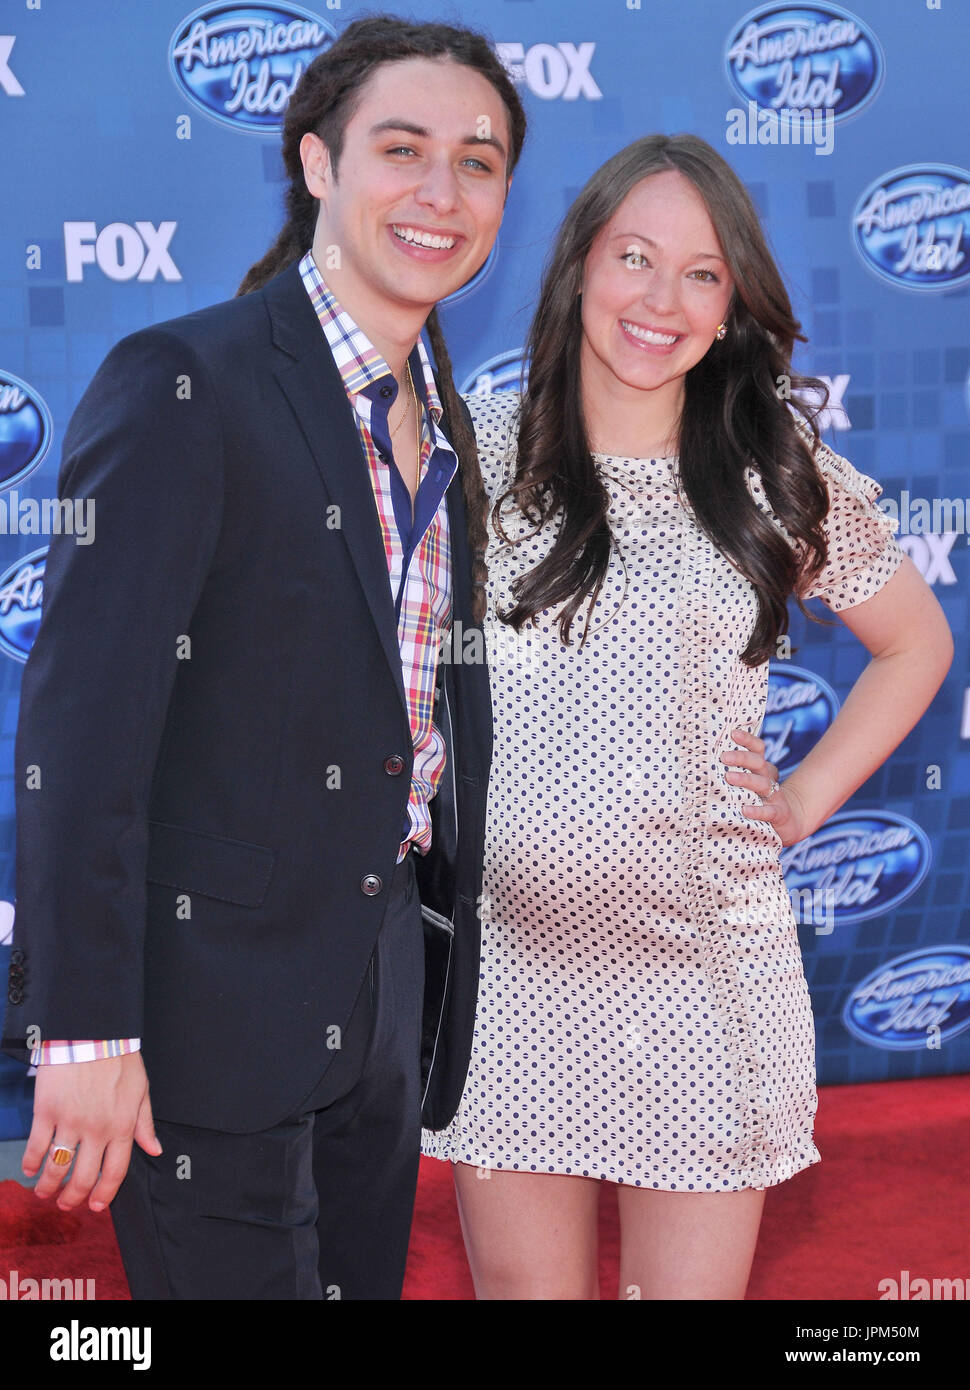 Jason Castro & Wife Mandy Mayhall at the American Idol Season 10 Finale  held at the Nokia Theatre LA Live in Los Angeles, CA. The event took place  on Wednesday, May 25